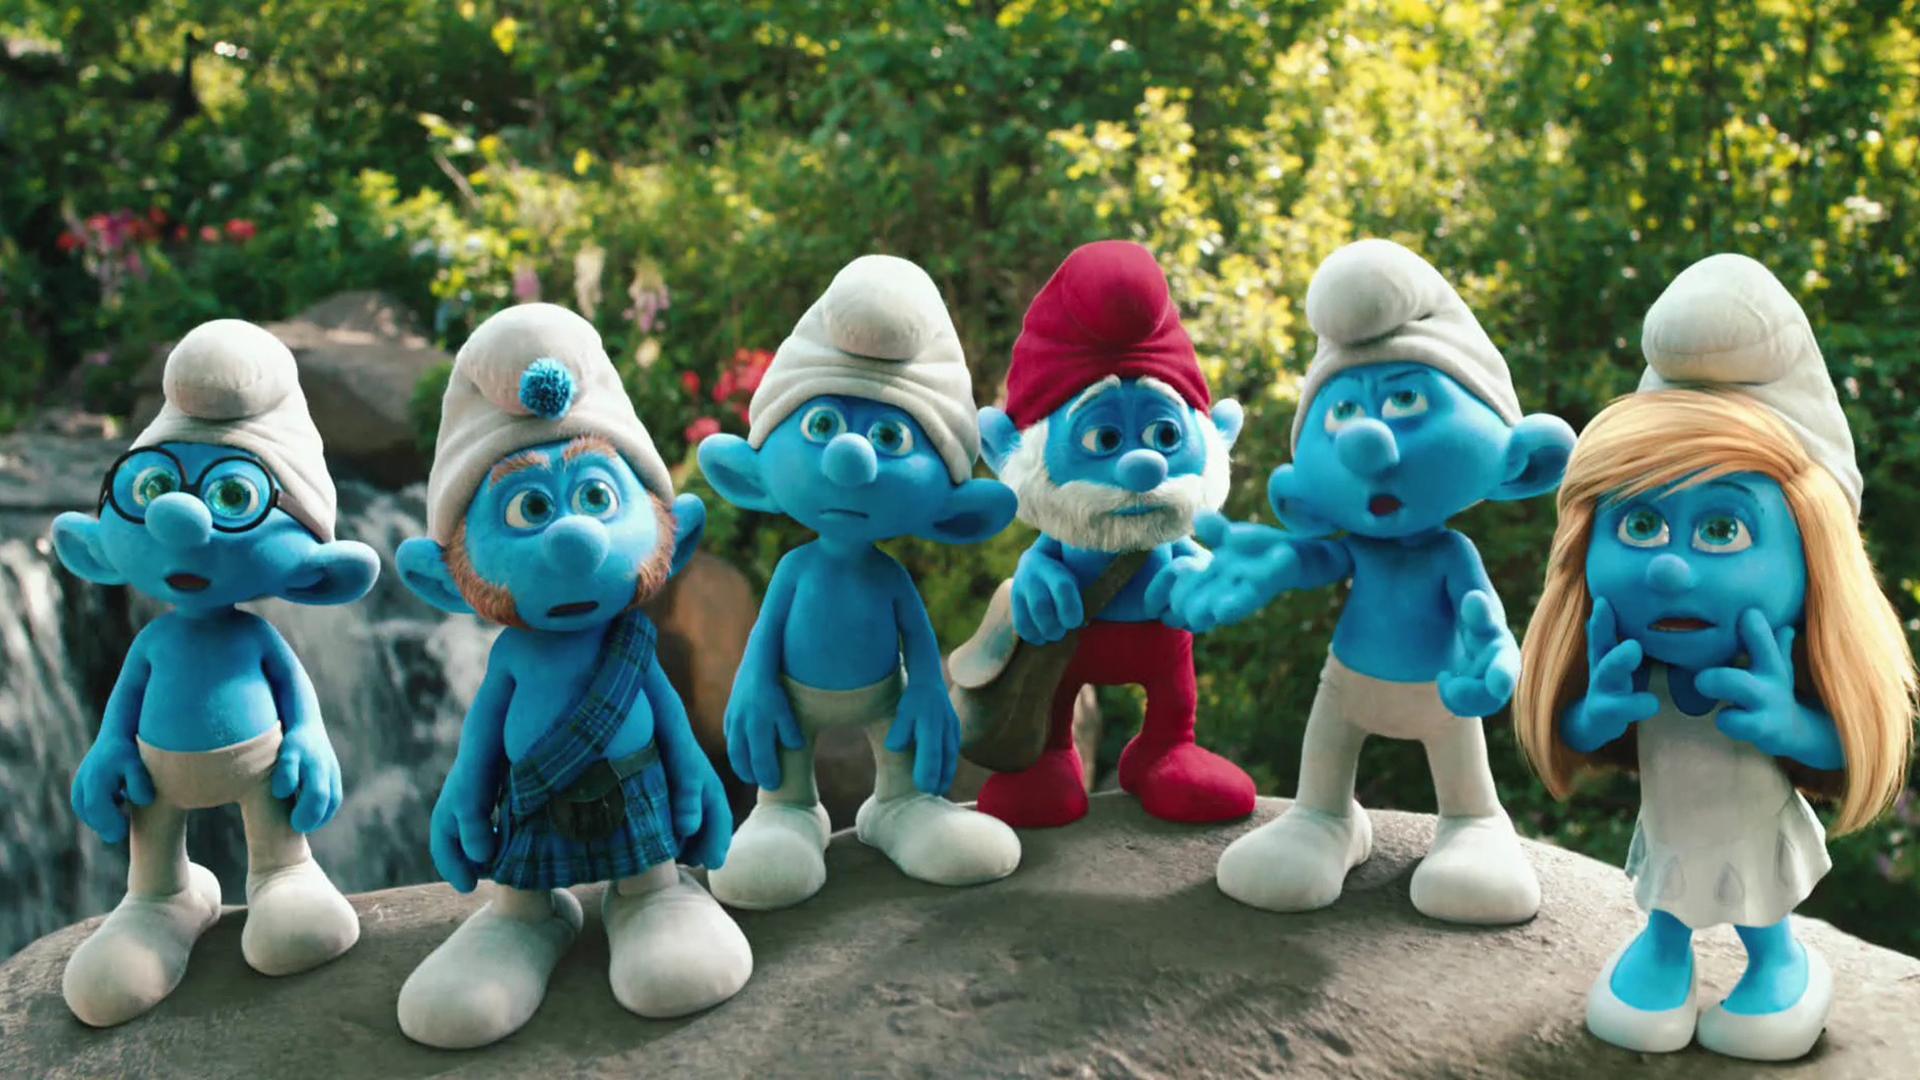 5. "The Smurfs" - wide 11